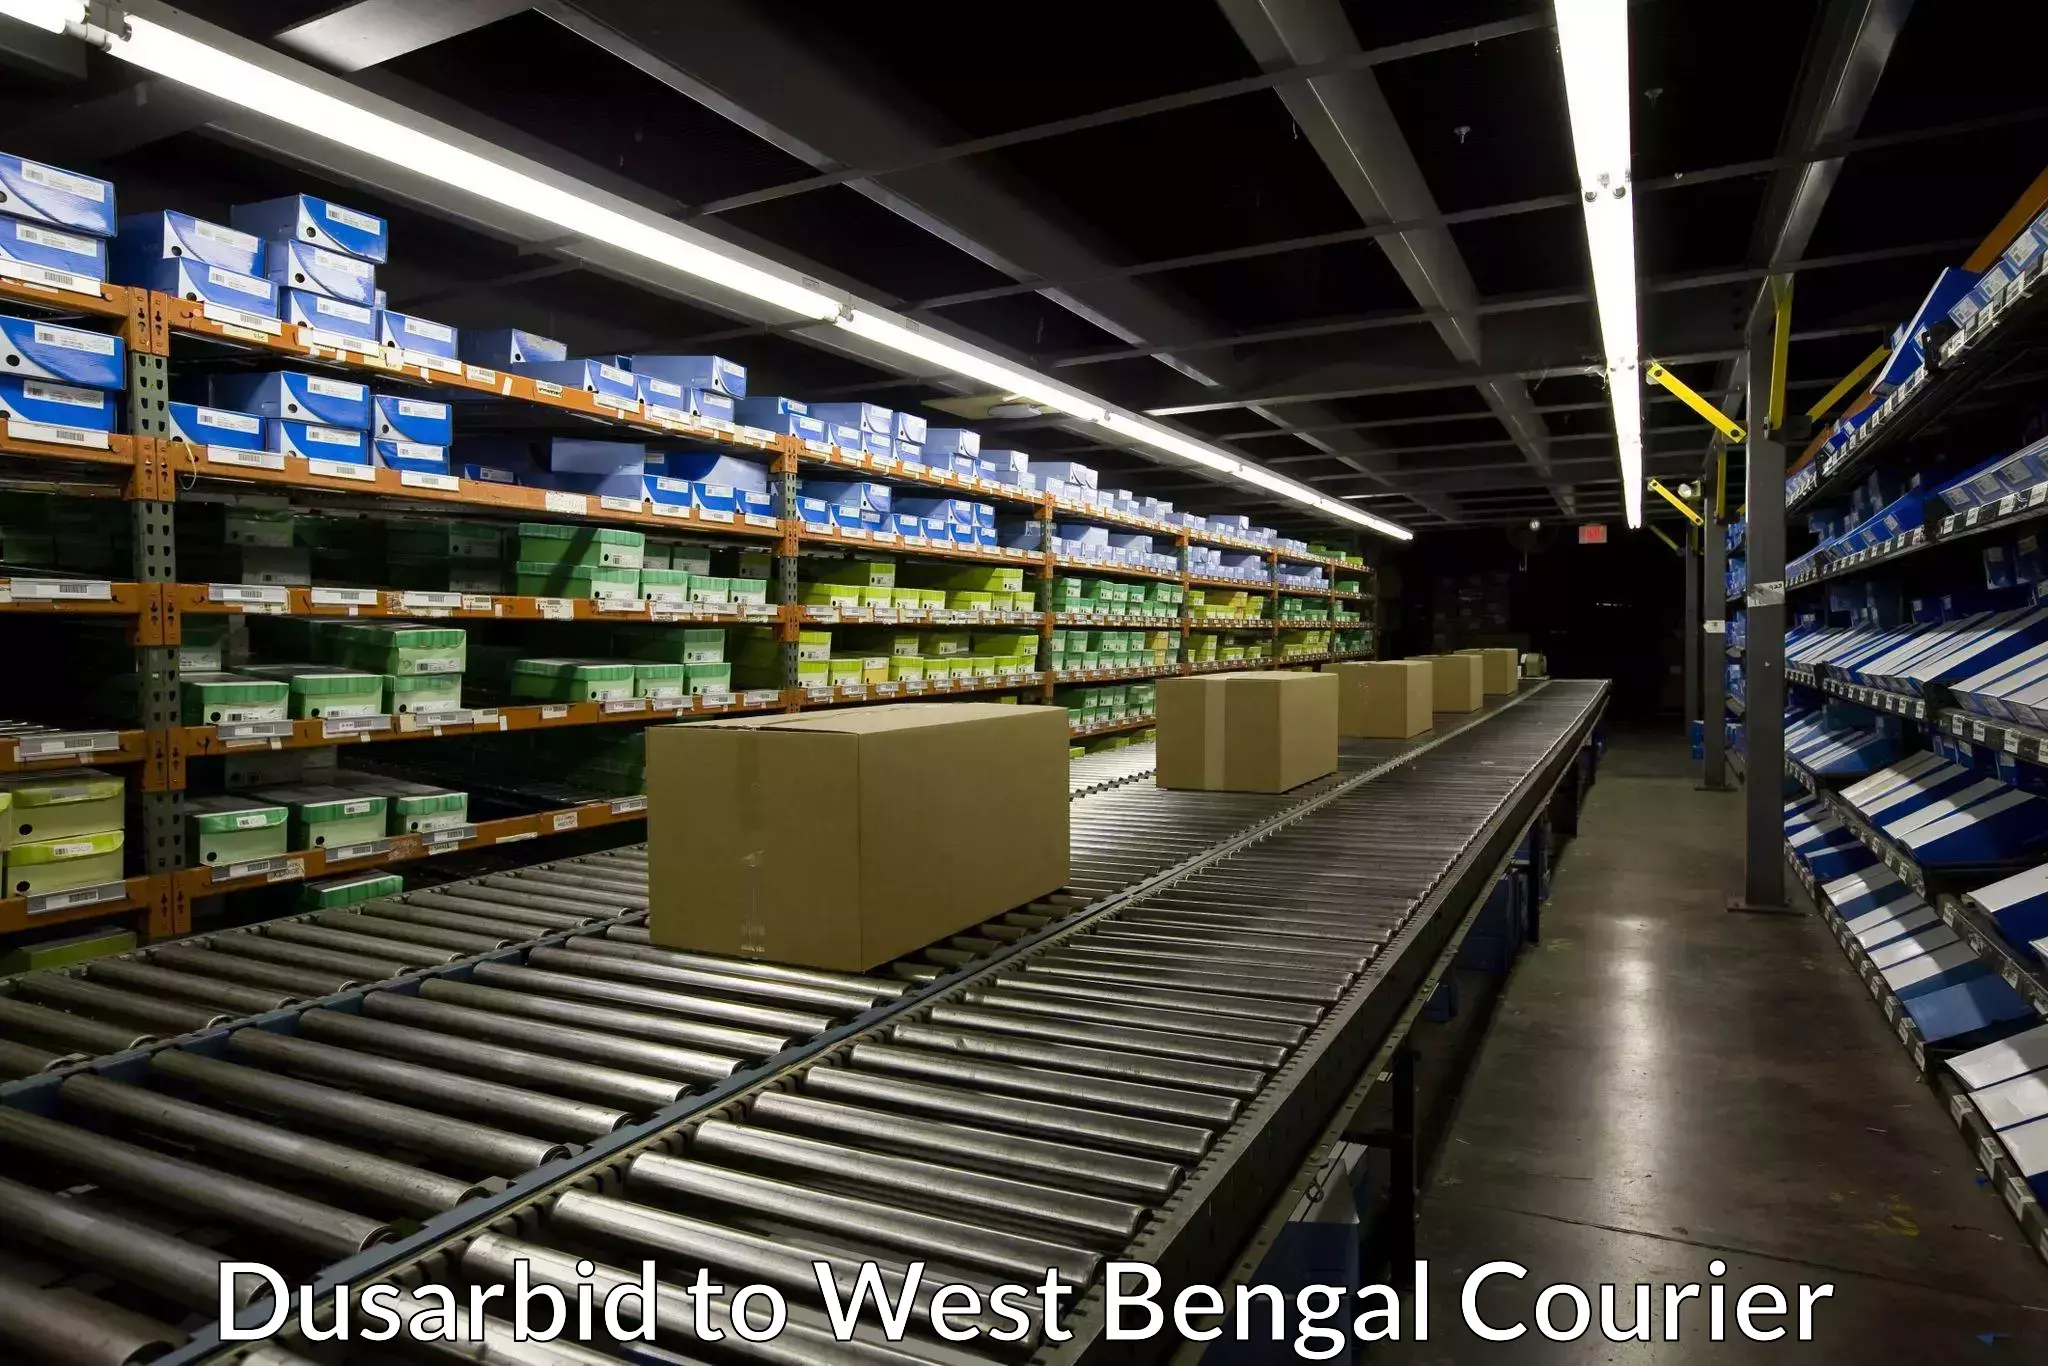 Seamless shipping experience Dusarbid to West Bengal